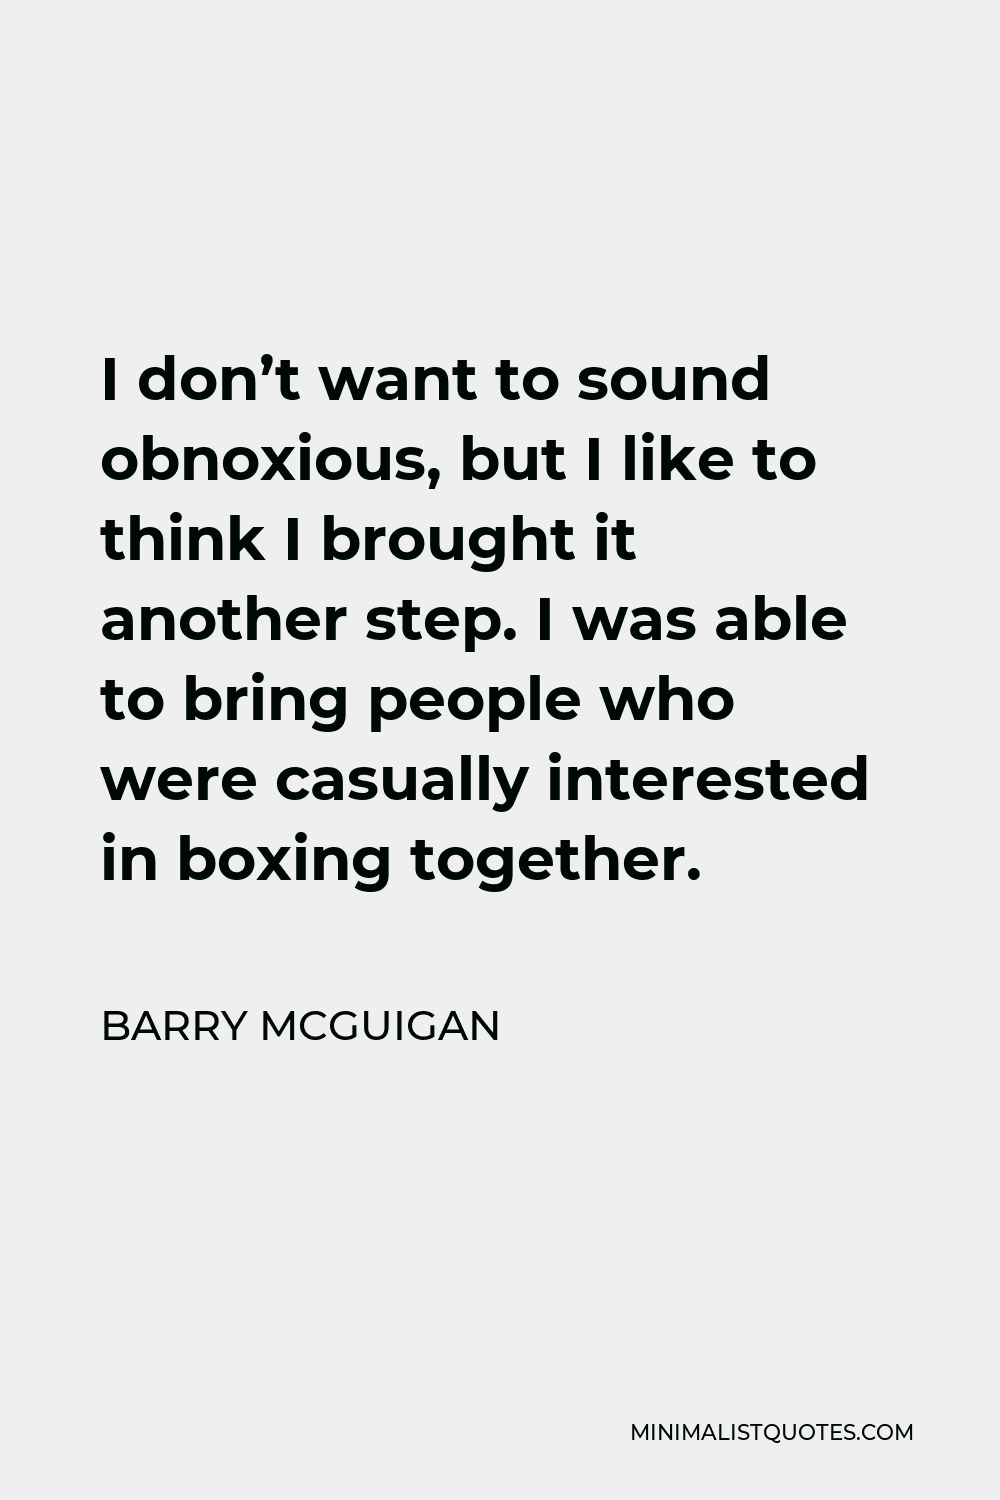 Barry McGuigan Quote - I don’t want to sound obnoxious, but I like to think I brought it another step. I was able to bring people who were casually interested in boxing together.